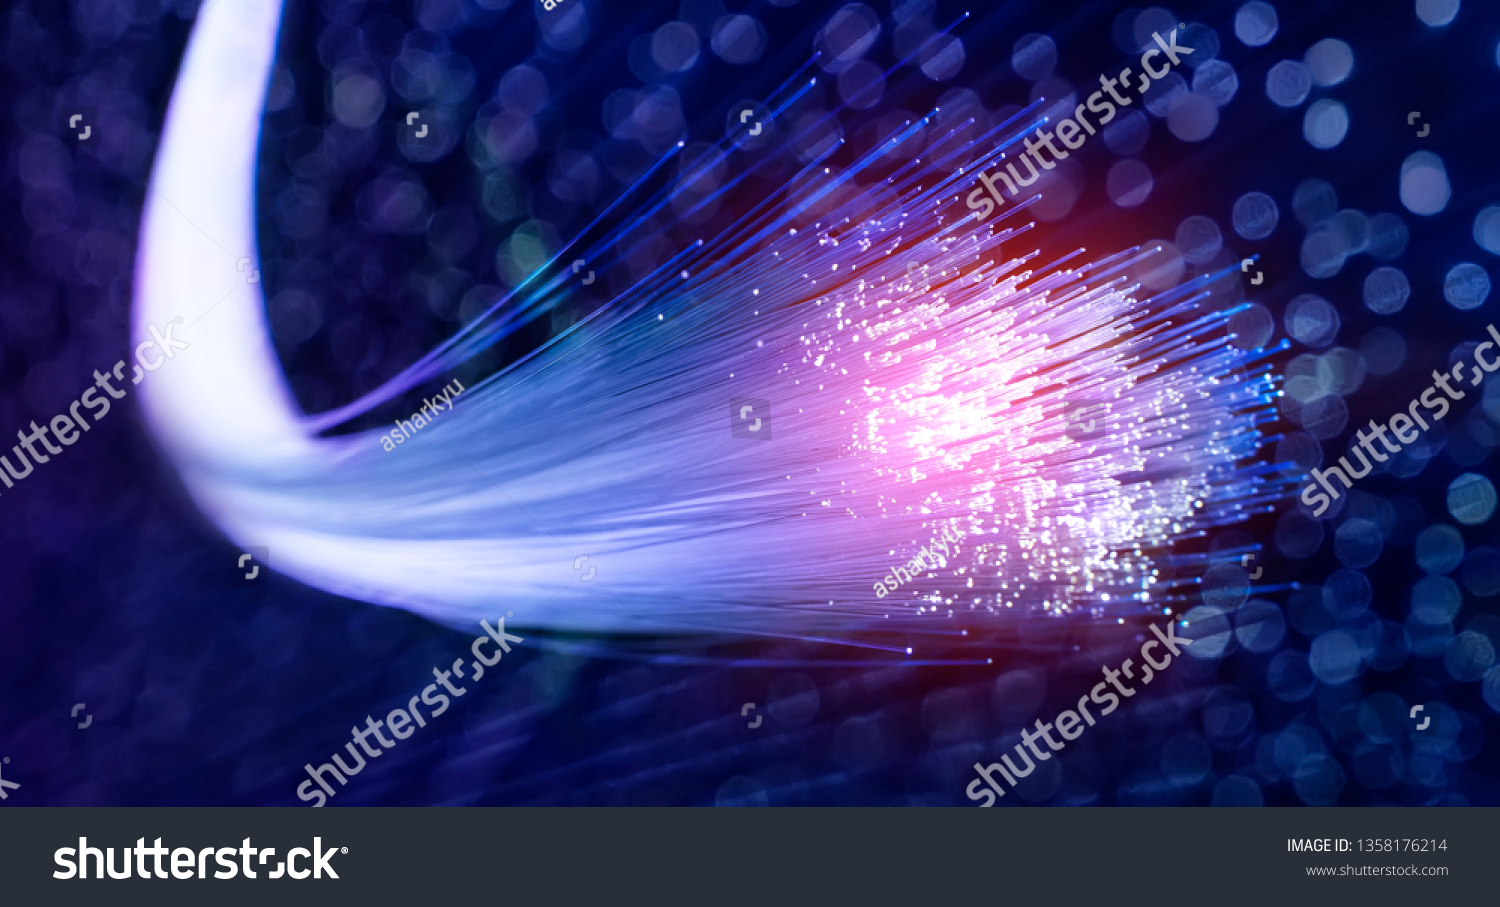 Fiber optics network cable lights abstract background #1358176214